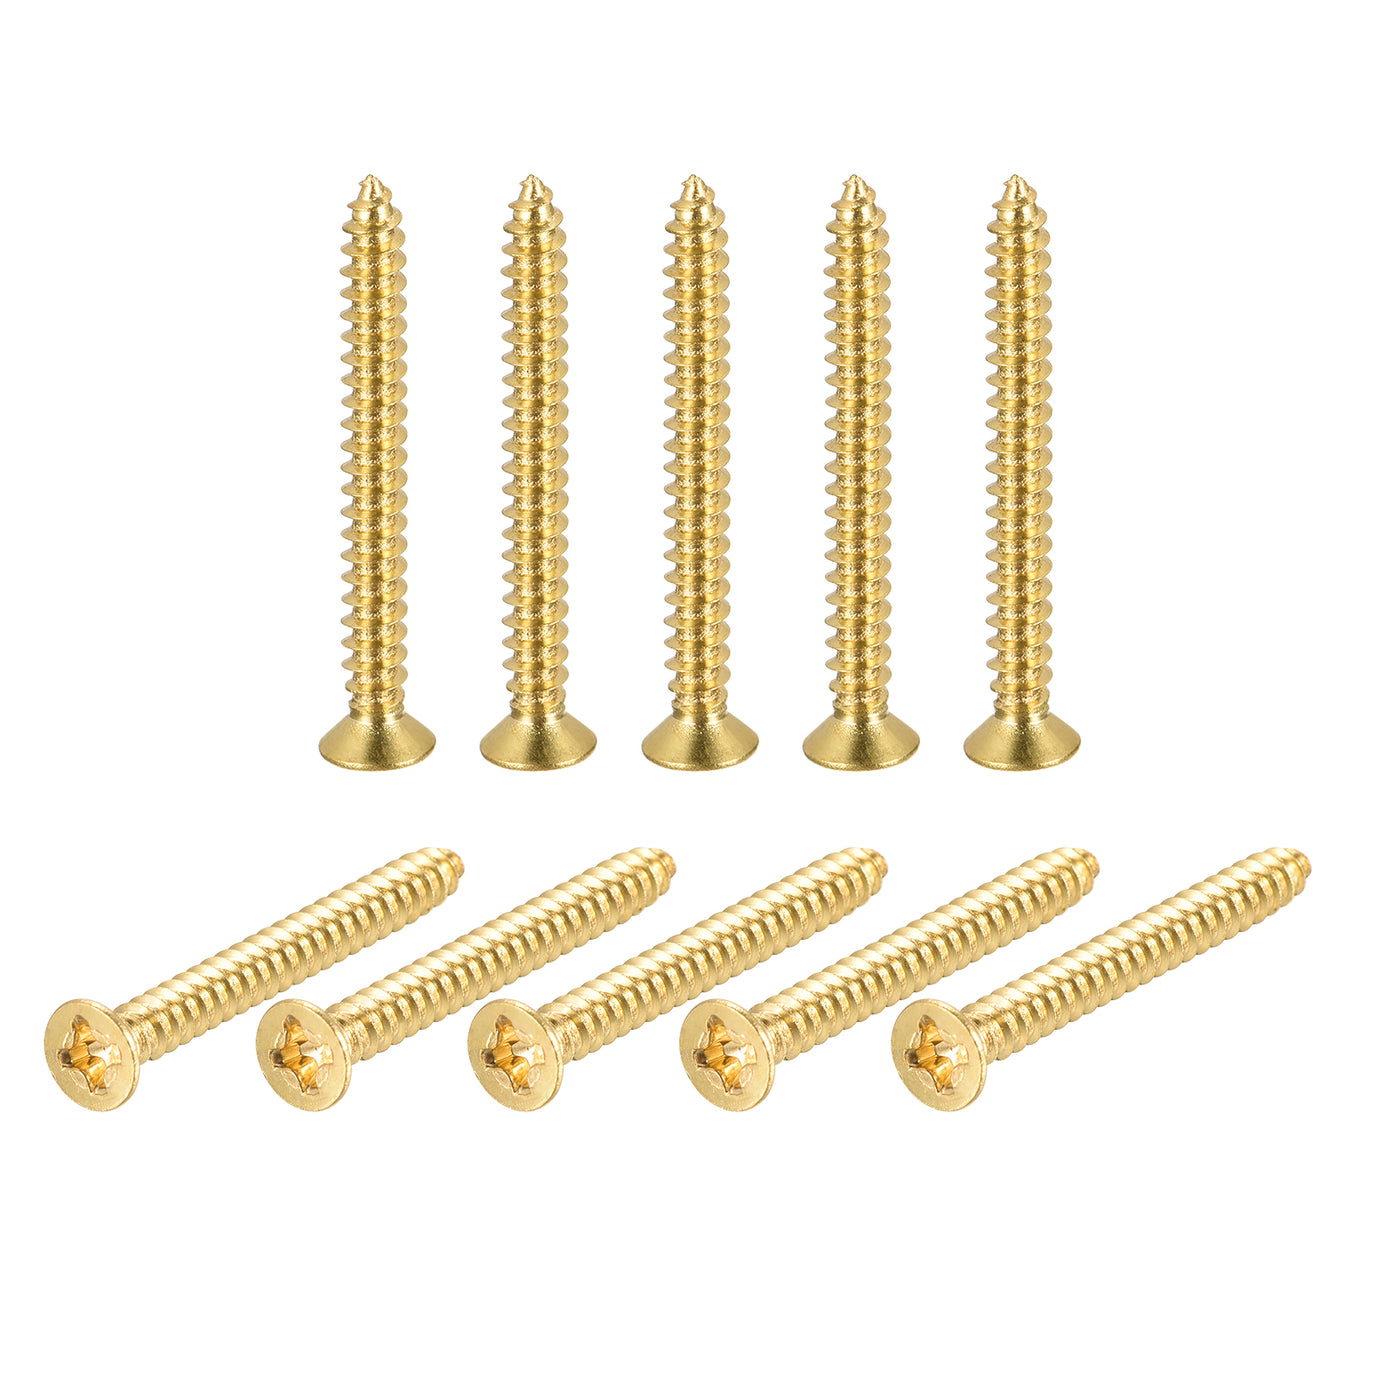 uxcell Uxcell Brass Wood Screws, M3.5x30mm Phillips Flat Head Self Tapping Connector for Door, Cabinet, Wooden Furniture 100Pcs